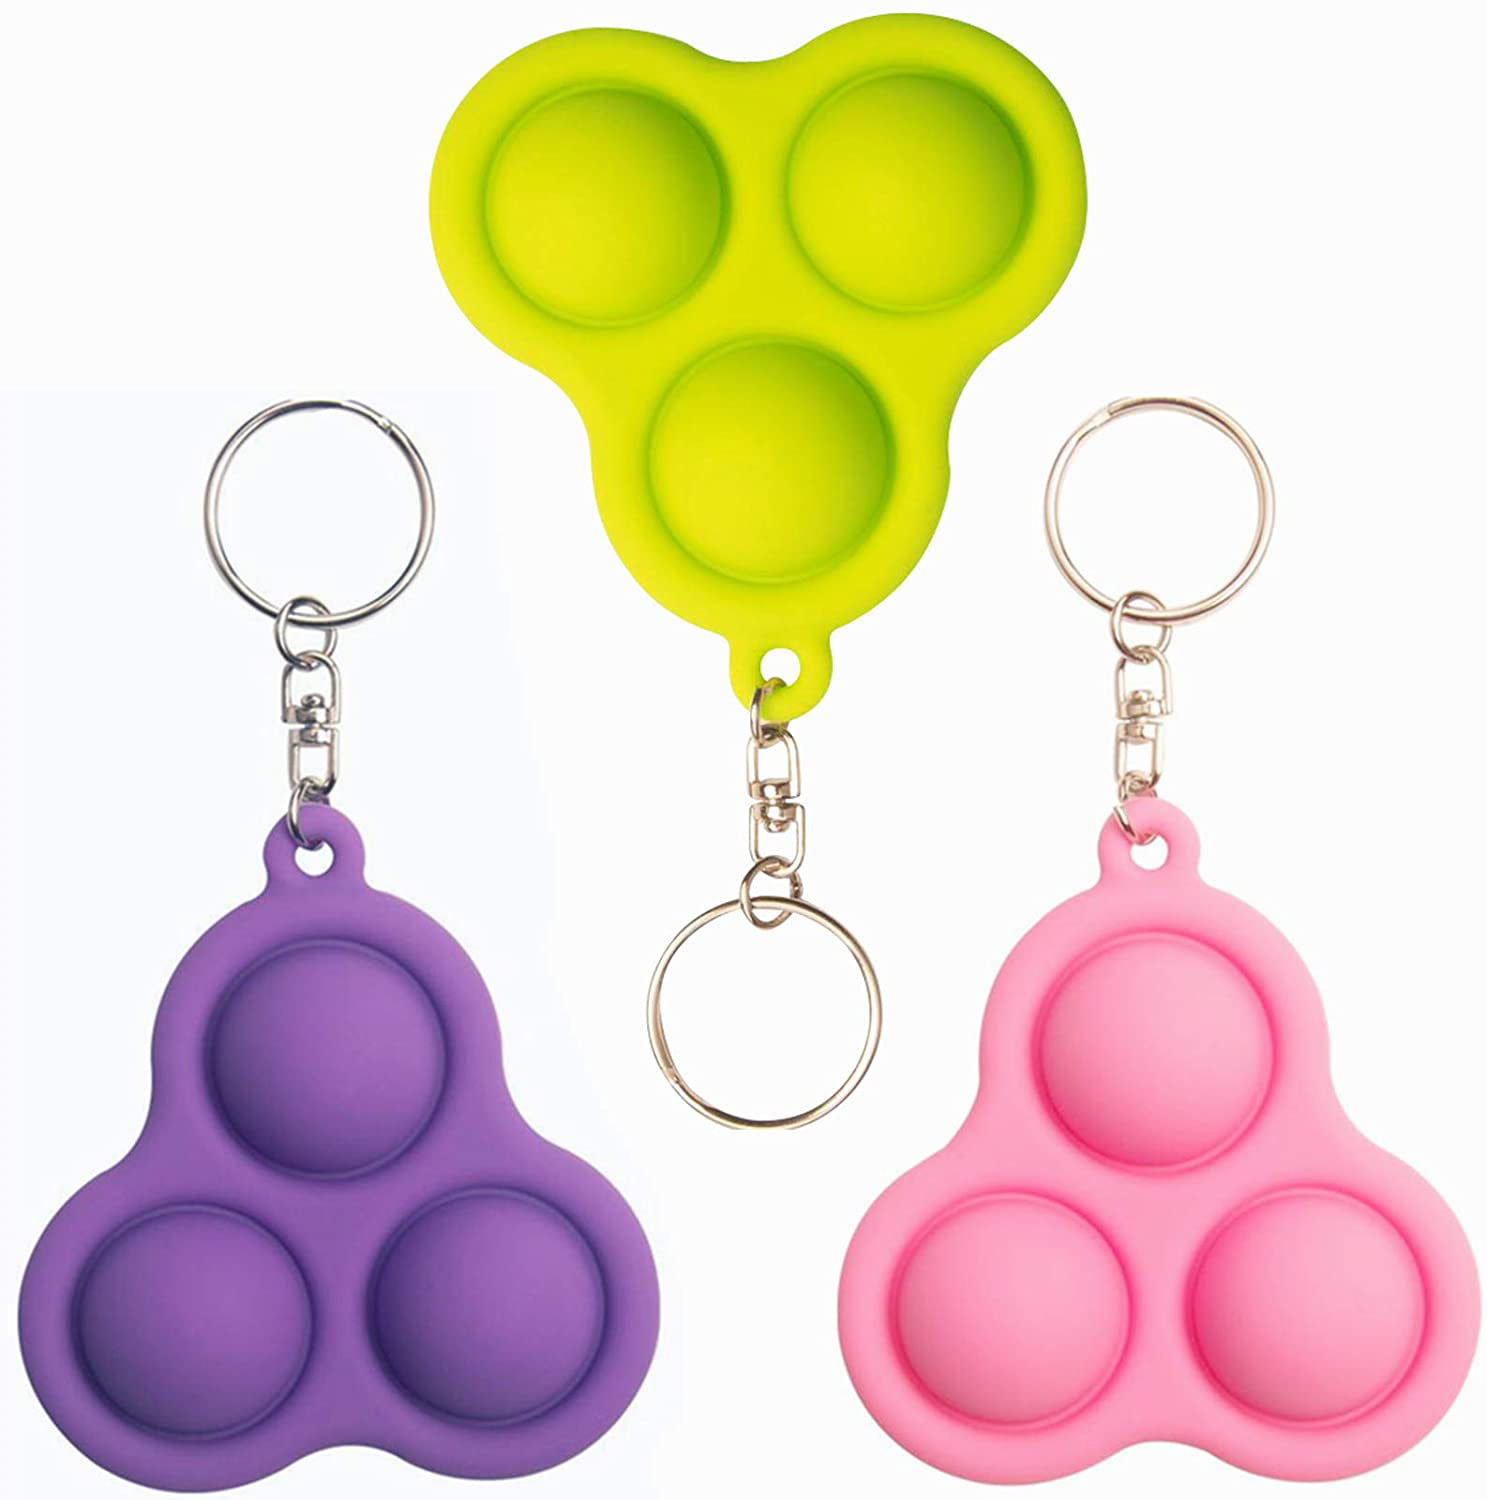 Details about   Simple Dimple Fidget Toy Mini Keychain Early Education Brain Teaser Popping Fidg 